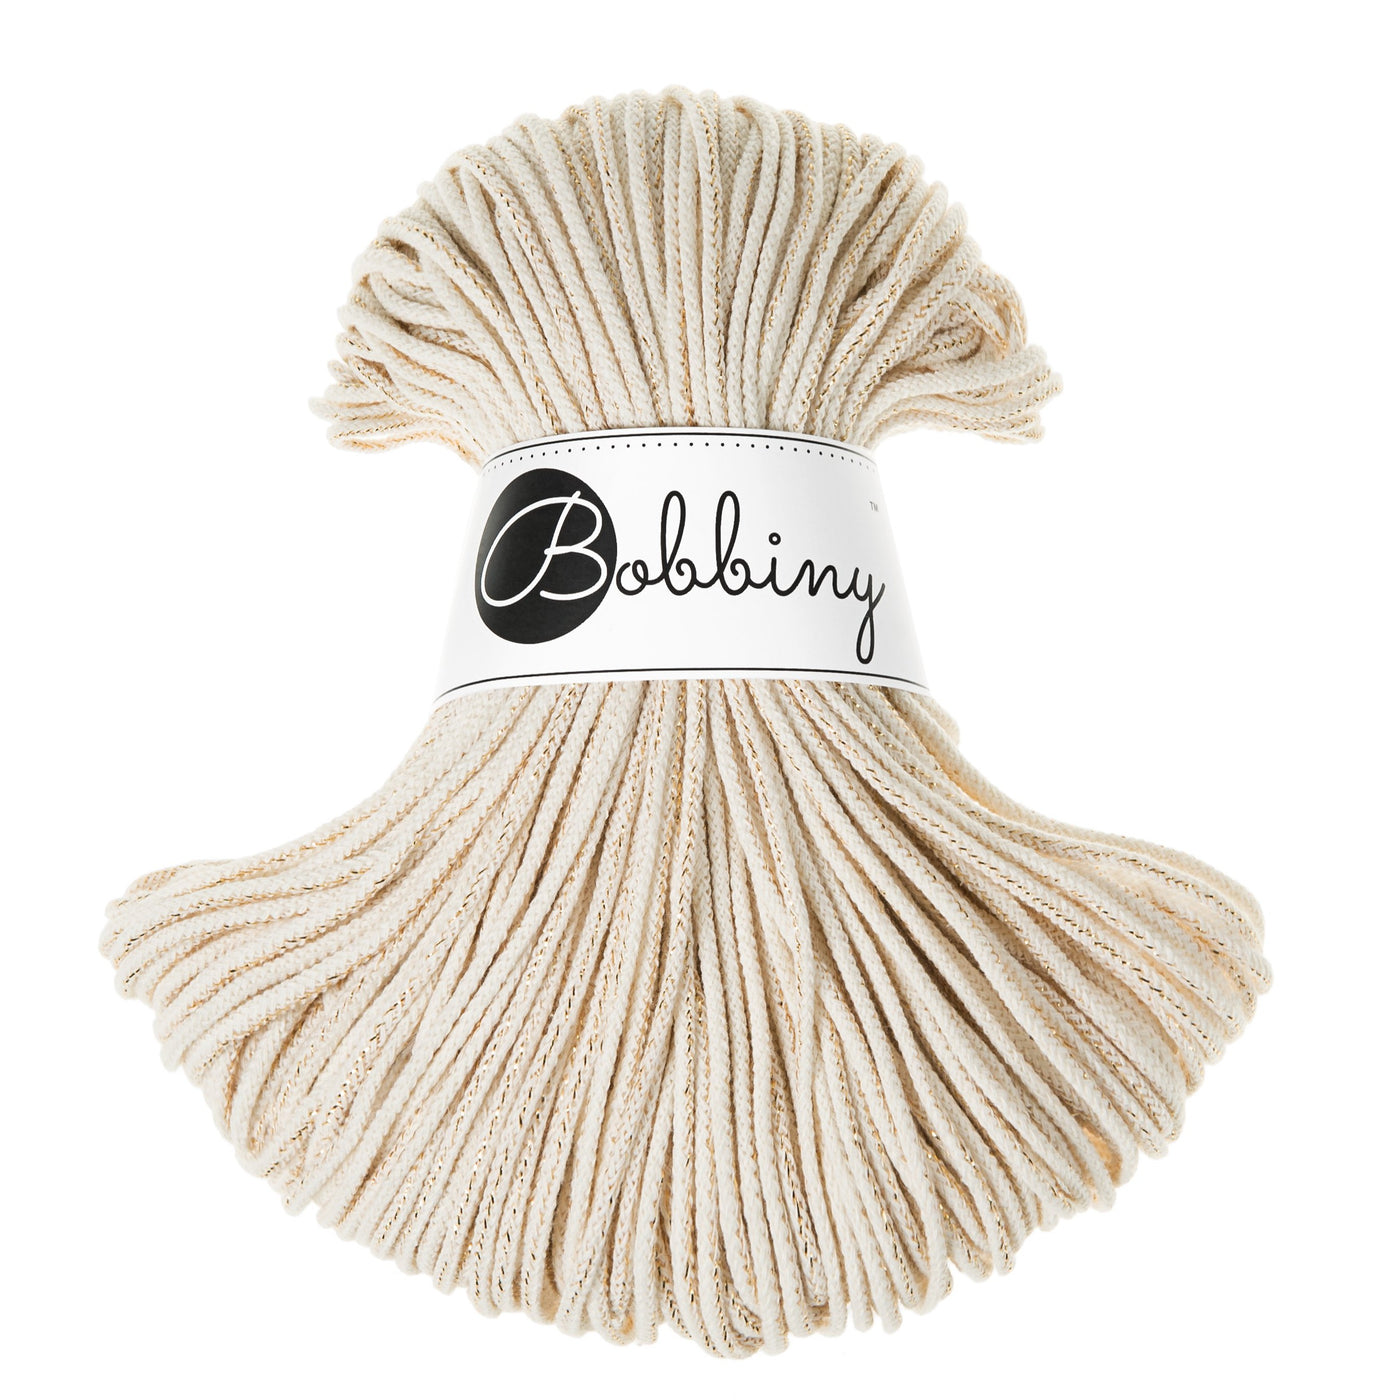 These beautiful Bobbiny cords are made in Poland from 100% recycled cottons and are non-toxic, certified safe for children and meet certified worldwide textile standards.  3mm Diameter  B100 metres Length  Recommended for use with 8-10mm crochet or knitting needles.  Cotton inner and outer layers, perfect for use with Macrame, Crochet or Knitting.